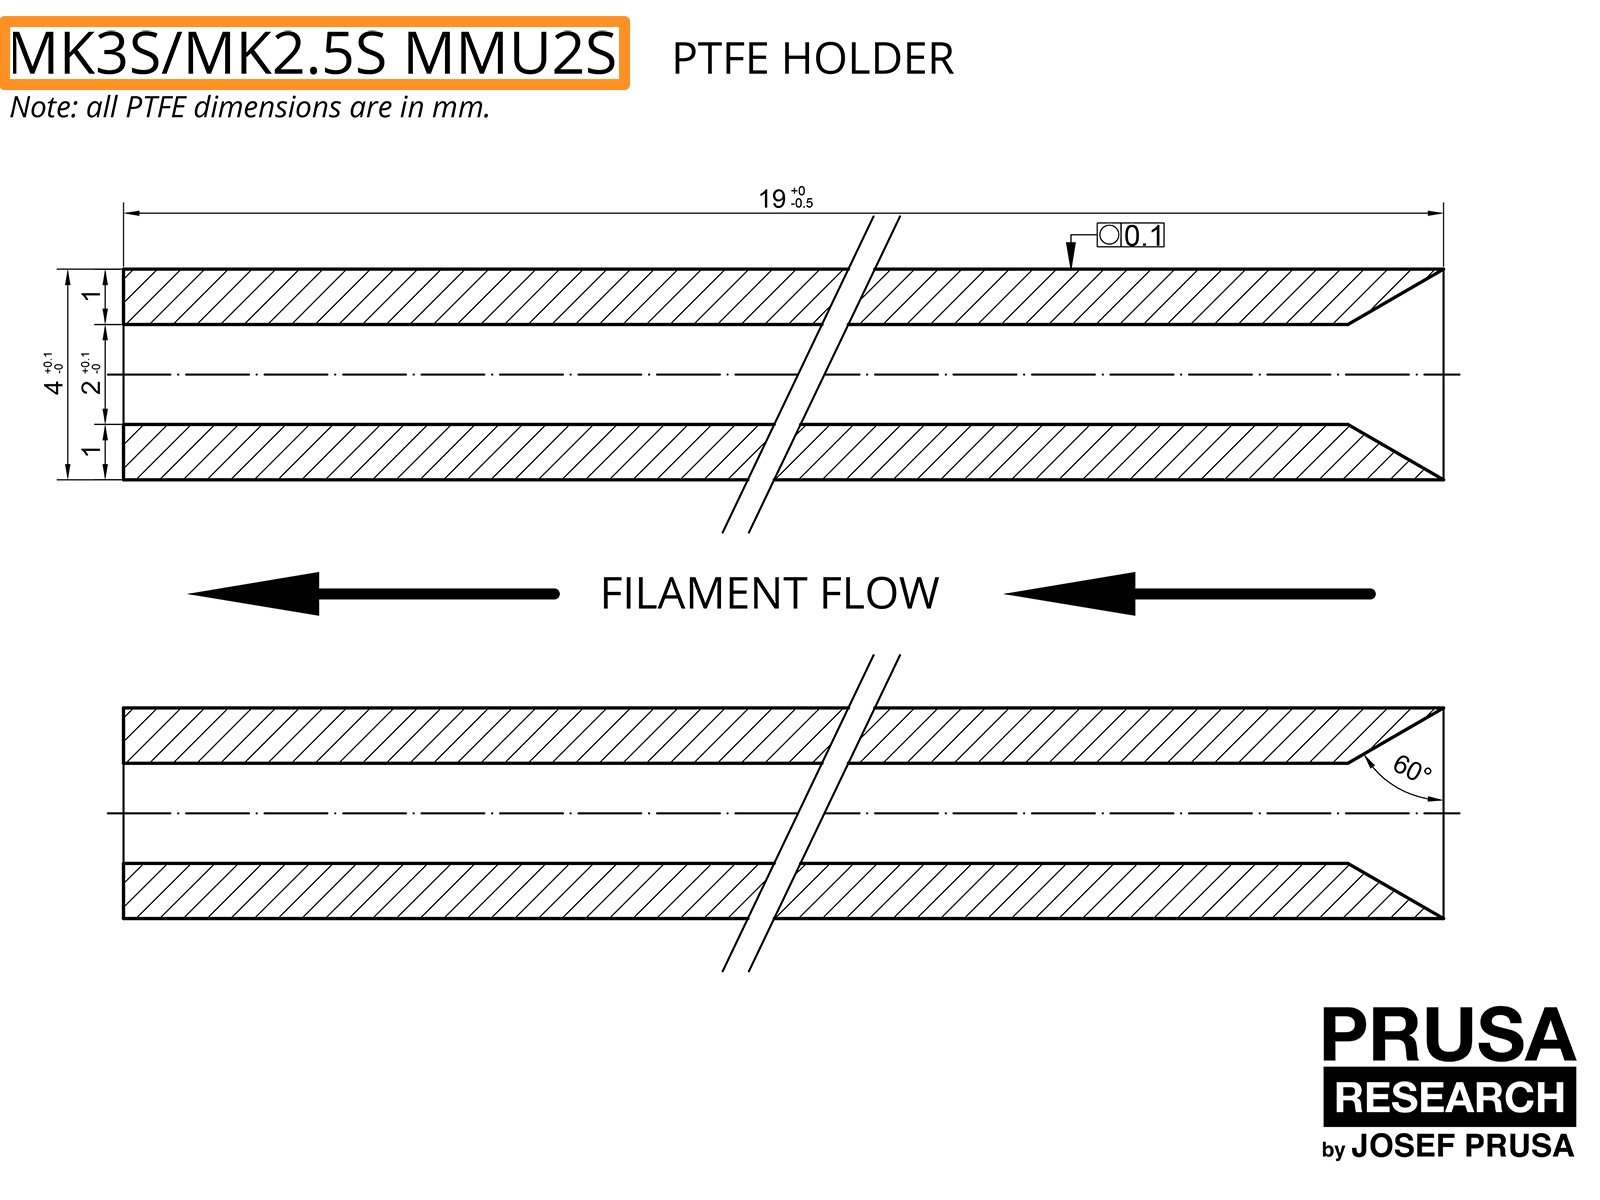 PTFE for the MK3S/MK2.5S MMU2S (part 1)